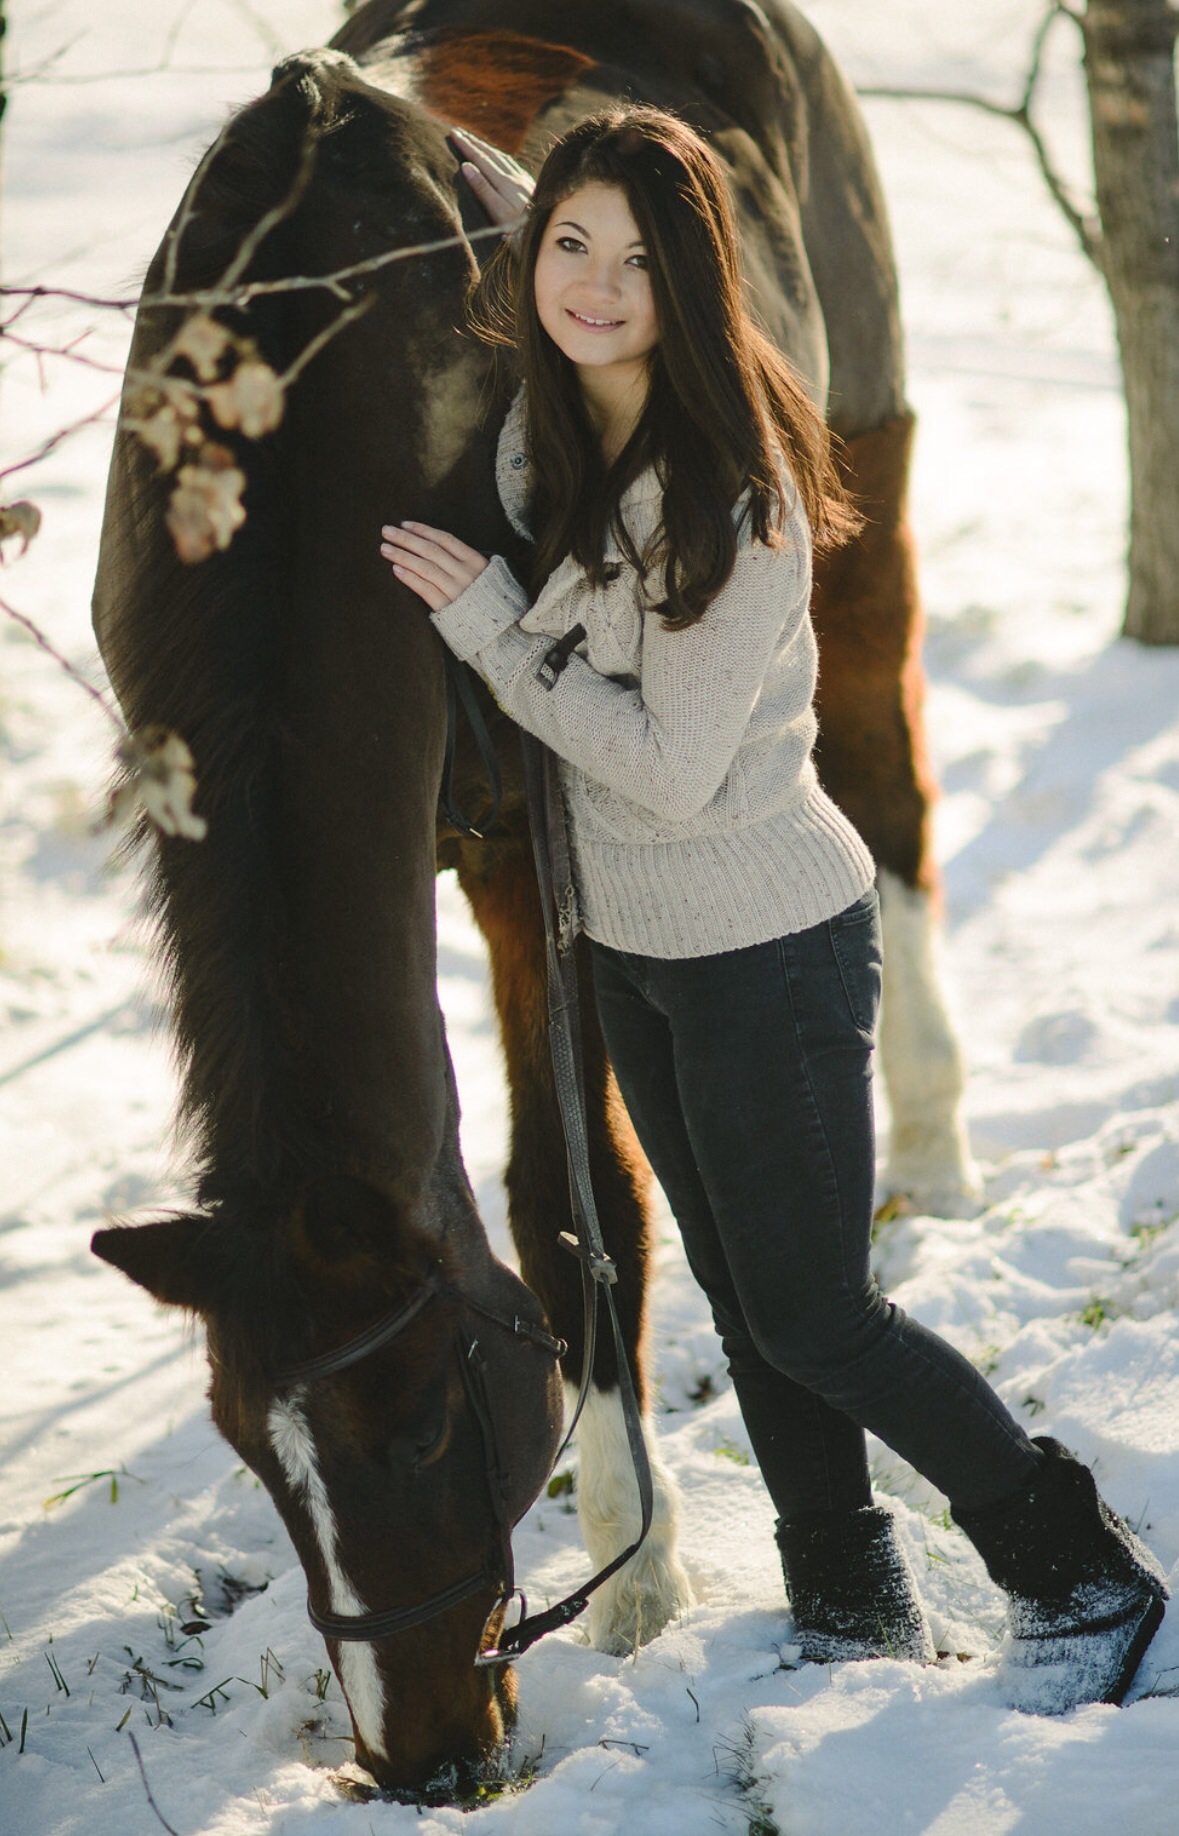 Jessica modelling for Gingersnap Photography's winter shoot.